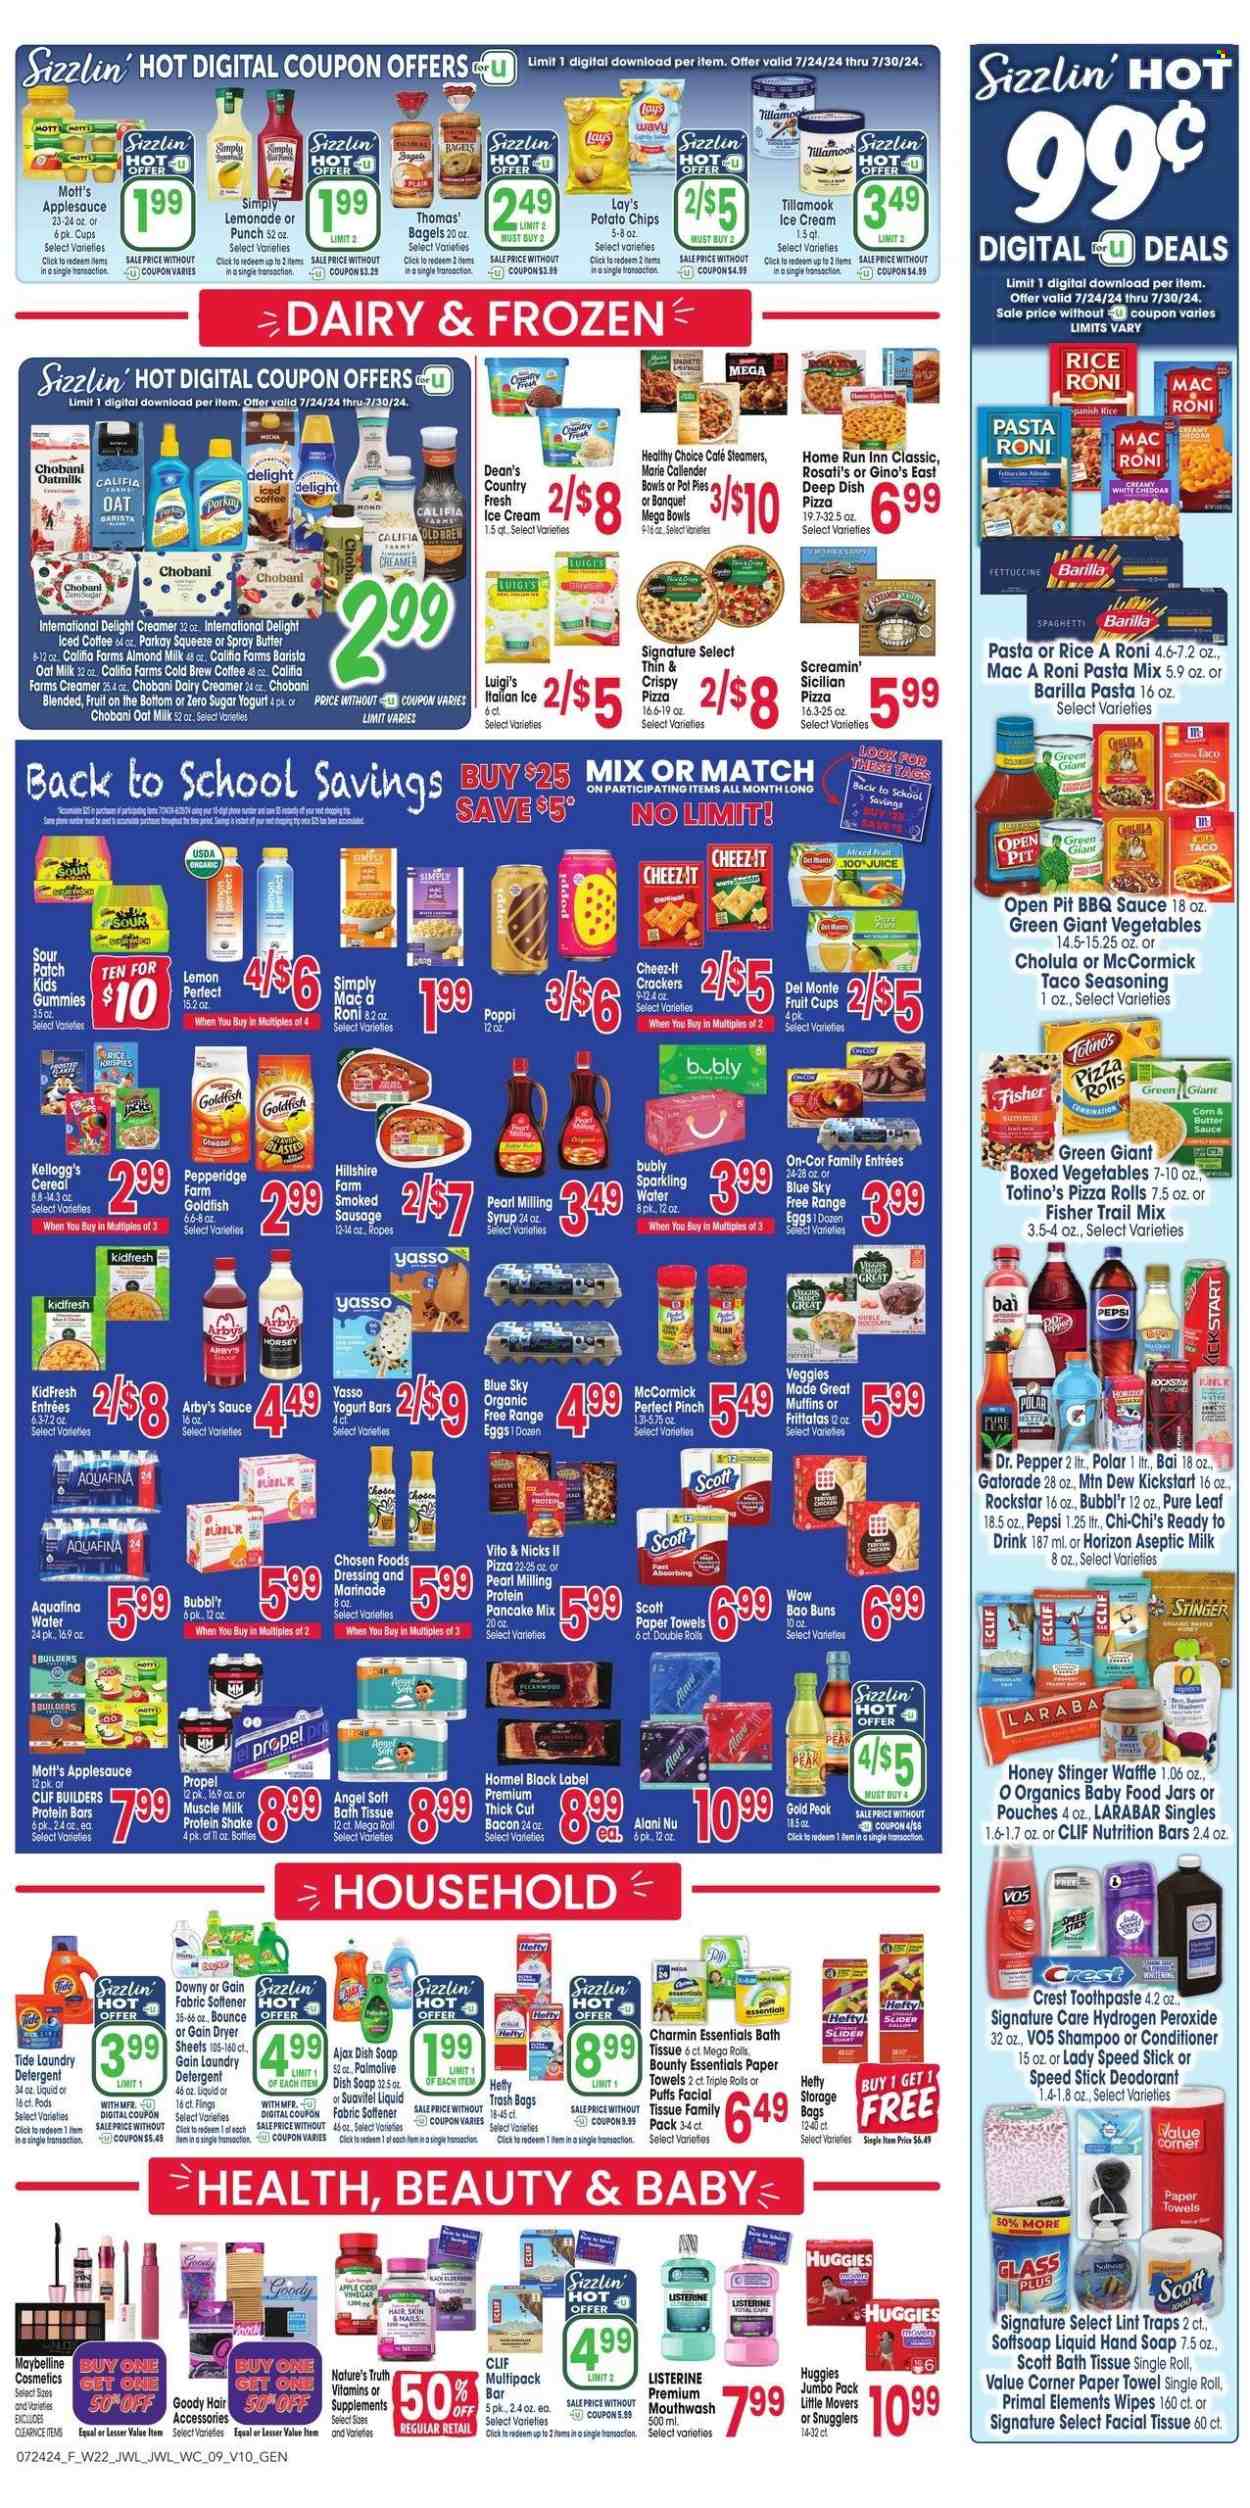 thumbnail - Jewel Osco Flyer - 07/24/2024 - 07/30/2024 - Sales products - bagels, pie, pizza rolls, muffin, pot pie, puffs, pancake mix, corn, fruit cup, Mott's, spaghetti, pizza, pasta, Barilla, Healthy Choice, pasta sides, Hormel, ready meal, rice sides, plant based product, Hillshire Farm, smoked sausage, Chobani, snack bar, almond milk, protein drink, muscle milk, oat milk, plant-based milk, eggs, creamer, coffee and tea creamer, ice cream, Screamin' Sicilian, Bounty, crackers, Kellogg's, Sour Patch, potato chips, Lay’s, Goldfish, Cheez-It, salty snack, Del Monte, nutrition bar, protein bar, spice, seasoning, BBQ sauce, dressing, marinade, apple cider vinegar, apple sauce, syrup, trail mix, lemonade, Mountain Dew, Pepsi, juice, energy drink, Dr. Pepper, soft drink, Bai, Rockstar, Gatorade, electrolyte drink, antioxidant drink, Aquafina, flavored water, sparkling water, iced coffee, carbonated soft drink, coffee drink, Pure Leaf, organic baby food, baby food jar, chicken, wipes, Huggies, bath tissue, Scott, kitchen towels, paper towels, Charmin, detergent, Gain, Ajax, Tide, fabric softener, laundry detergent, Bounce, dryer sheets, Suavitel, dishwashing liquid, shampoo, hand soap, Palmolive, Listerine, toothpaste, mouthwash, Crest, facial tissues, conditioner, VO5, Speed Stick, deodorant, Hefty, trash bags, Maybelline, storage bag, jar, Primal, Nature's Truth, nutritional supplement, dietary supplement, hydrogen peroxide, vitamins. Page 9.